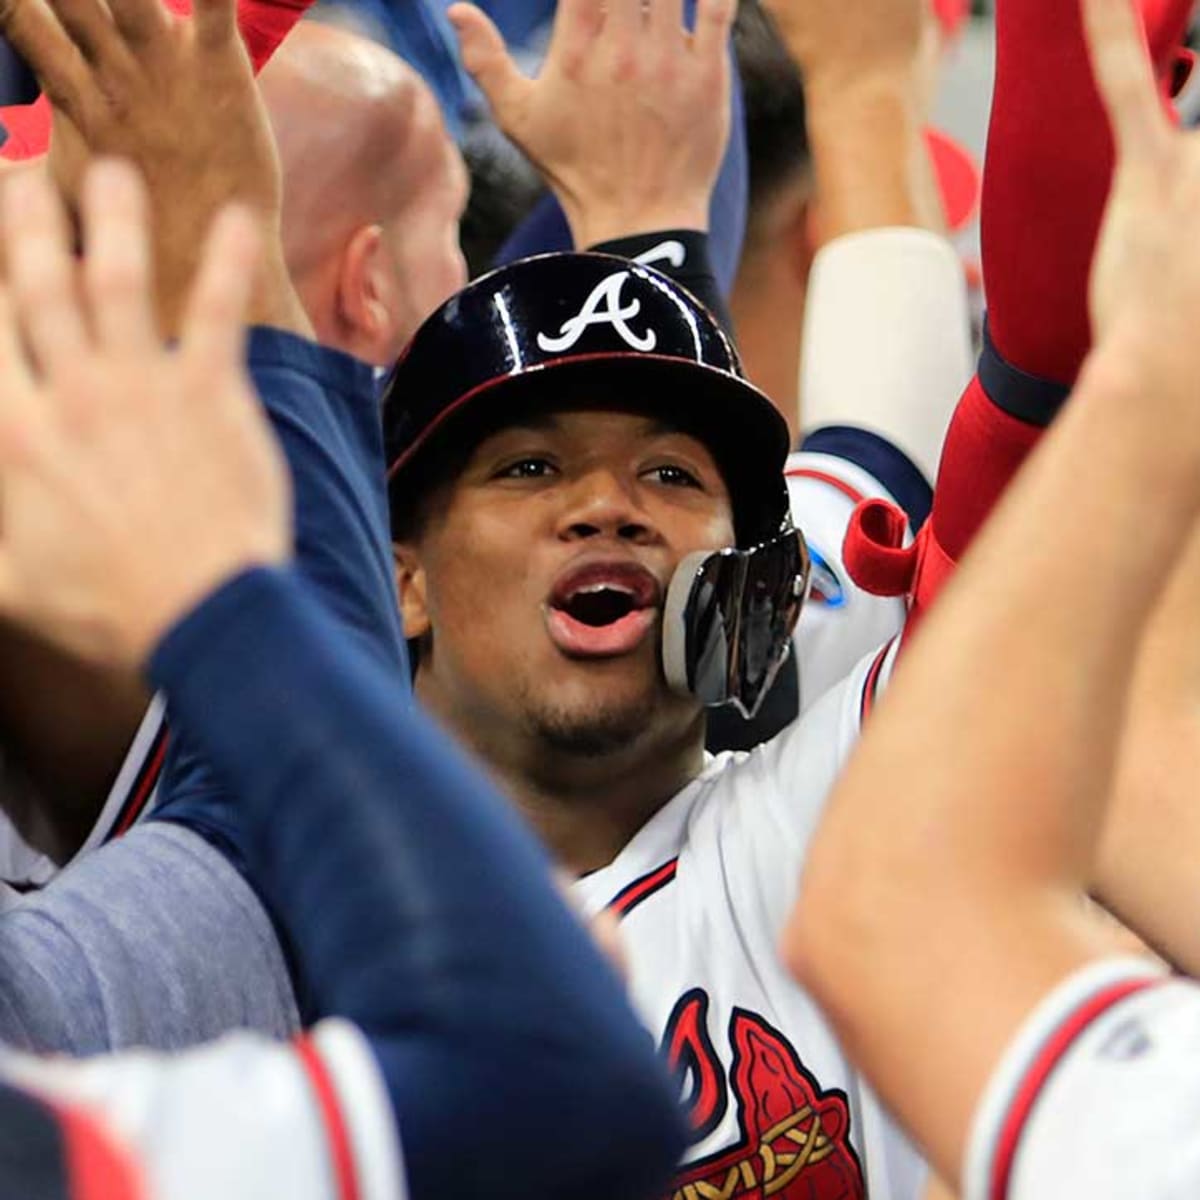 MLB playoffs: Ronald Acuna becomes youngest with postseason grand slam